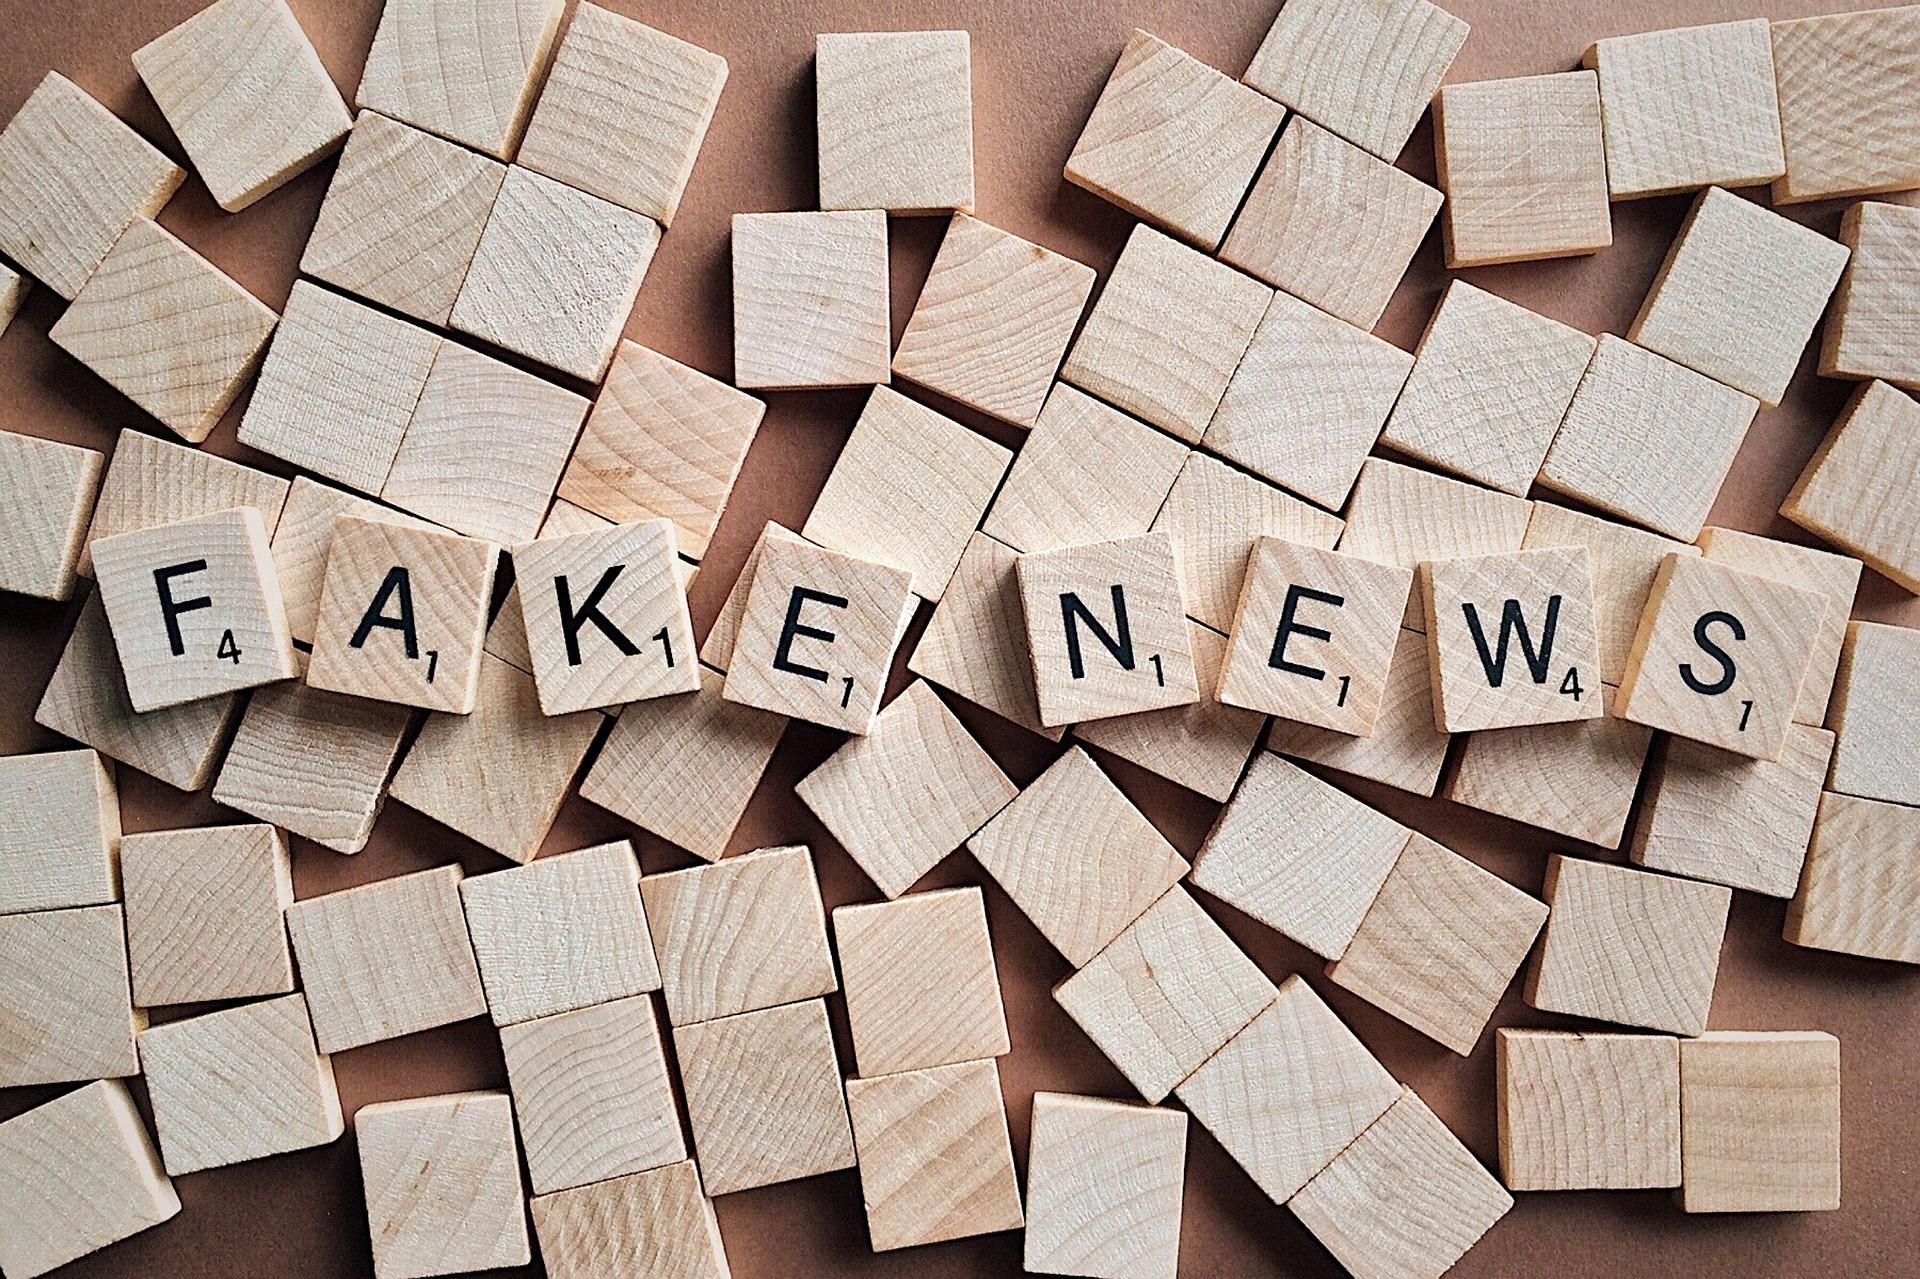 Wooden scrabble game pieces that spell out "fake news"